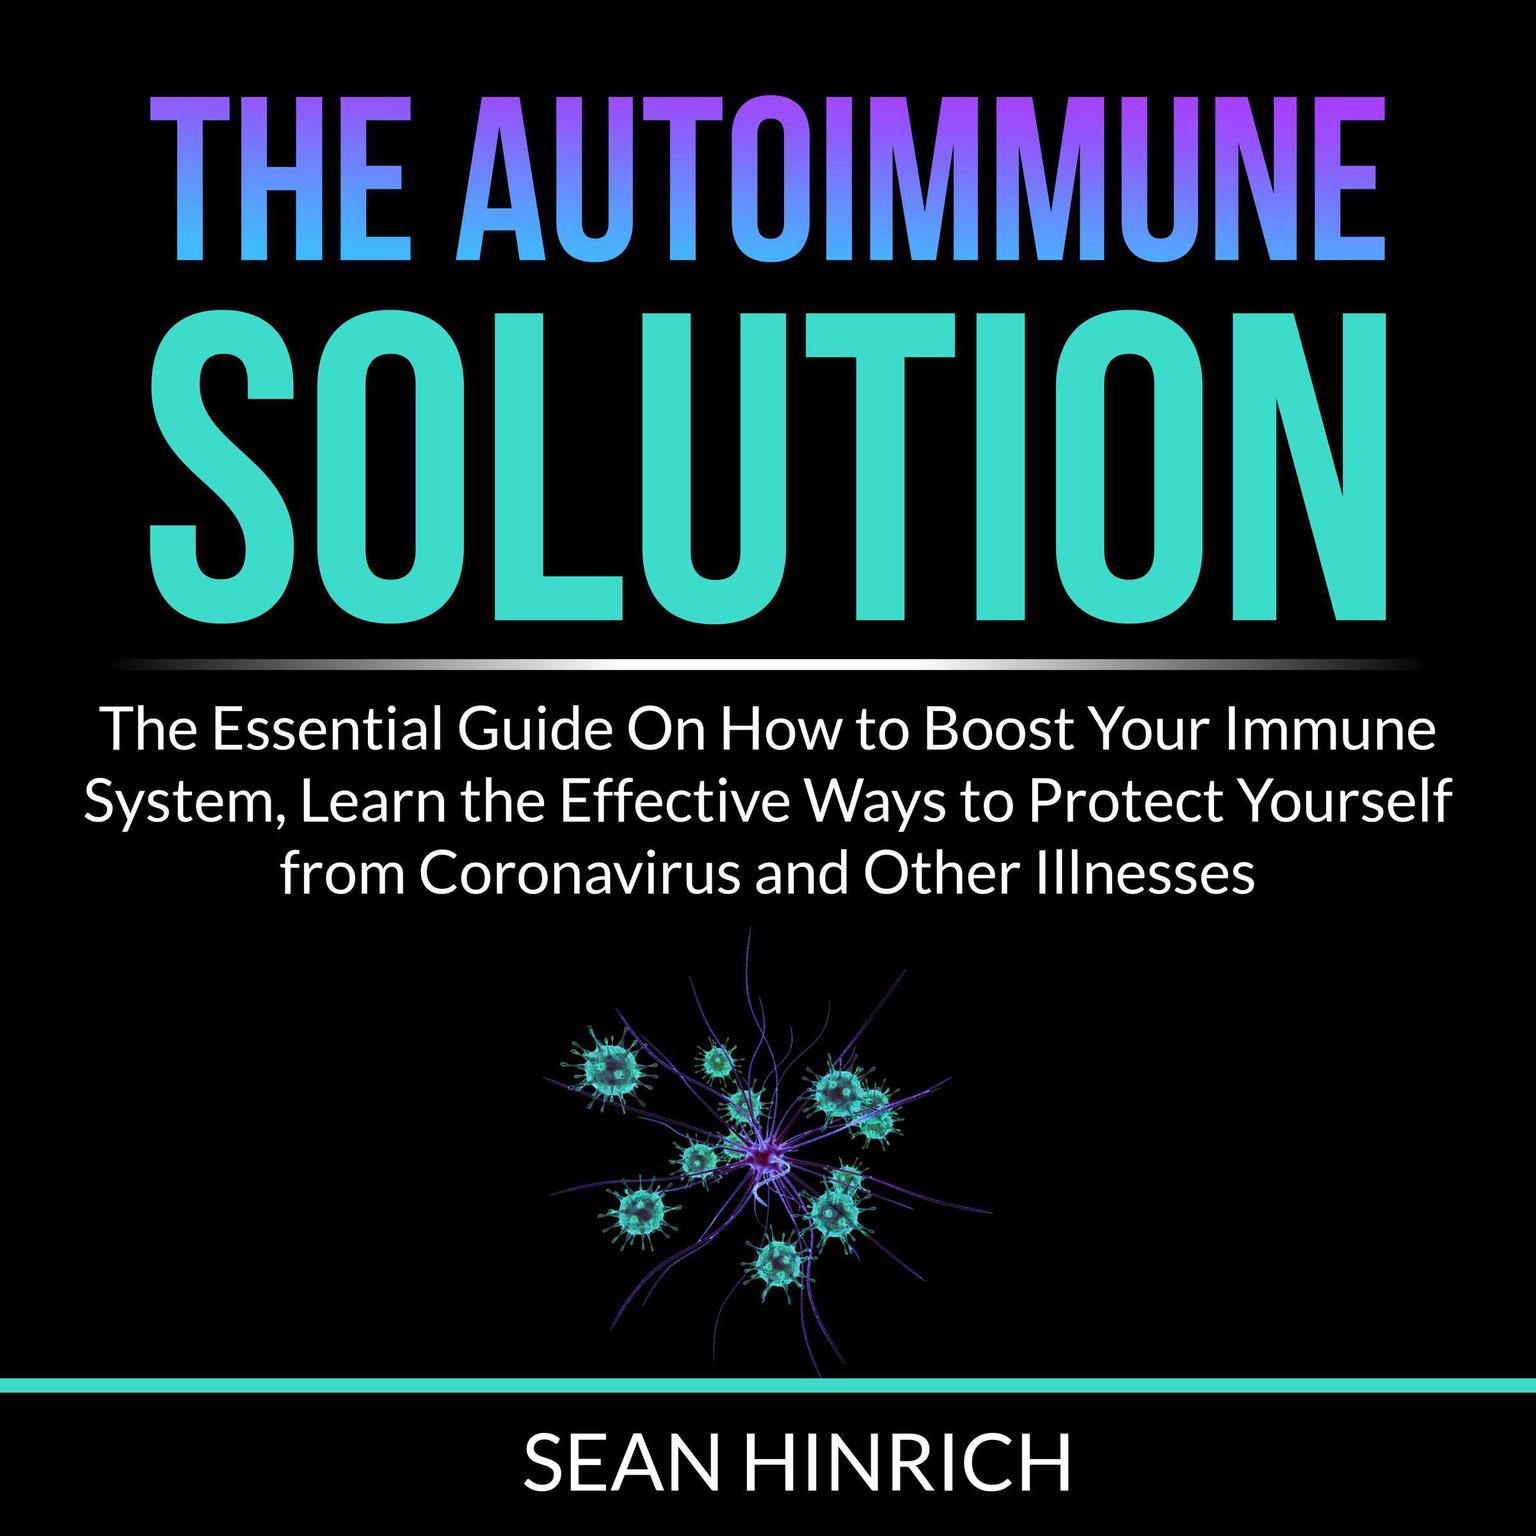 The Autoimmune Solution: The Essential Guide On How to Boost Your Immune System, Learn the Effective Ways to Protect Yourself from Coronavirus and Other Illnesses Audiobook, by Sean Hinrich